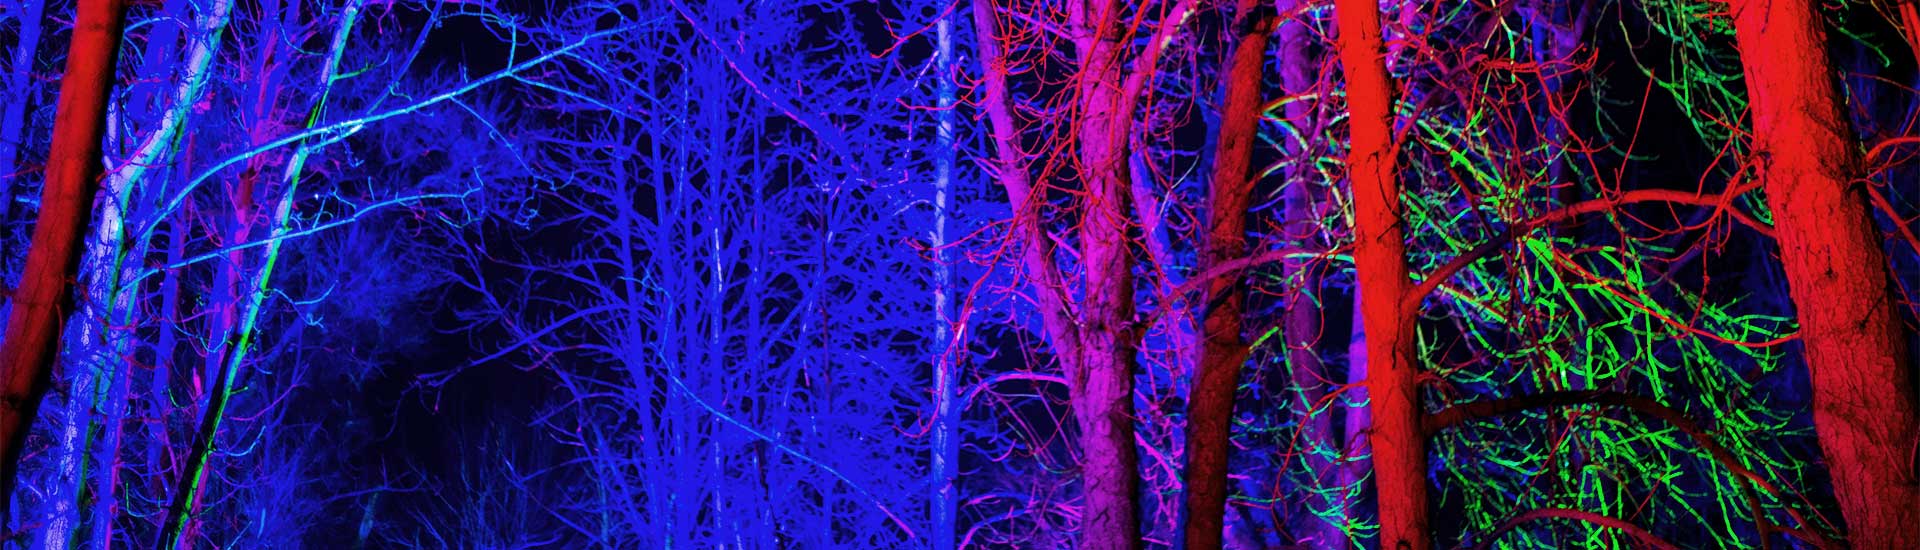 Winter tree branches illuminated by blue, purple, red and green flood lights during a 2022 Branson Christmas nighttime tour.